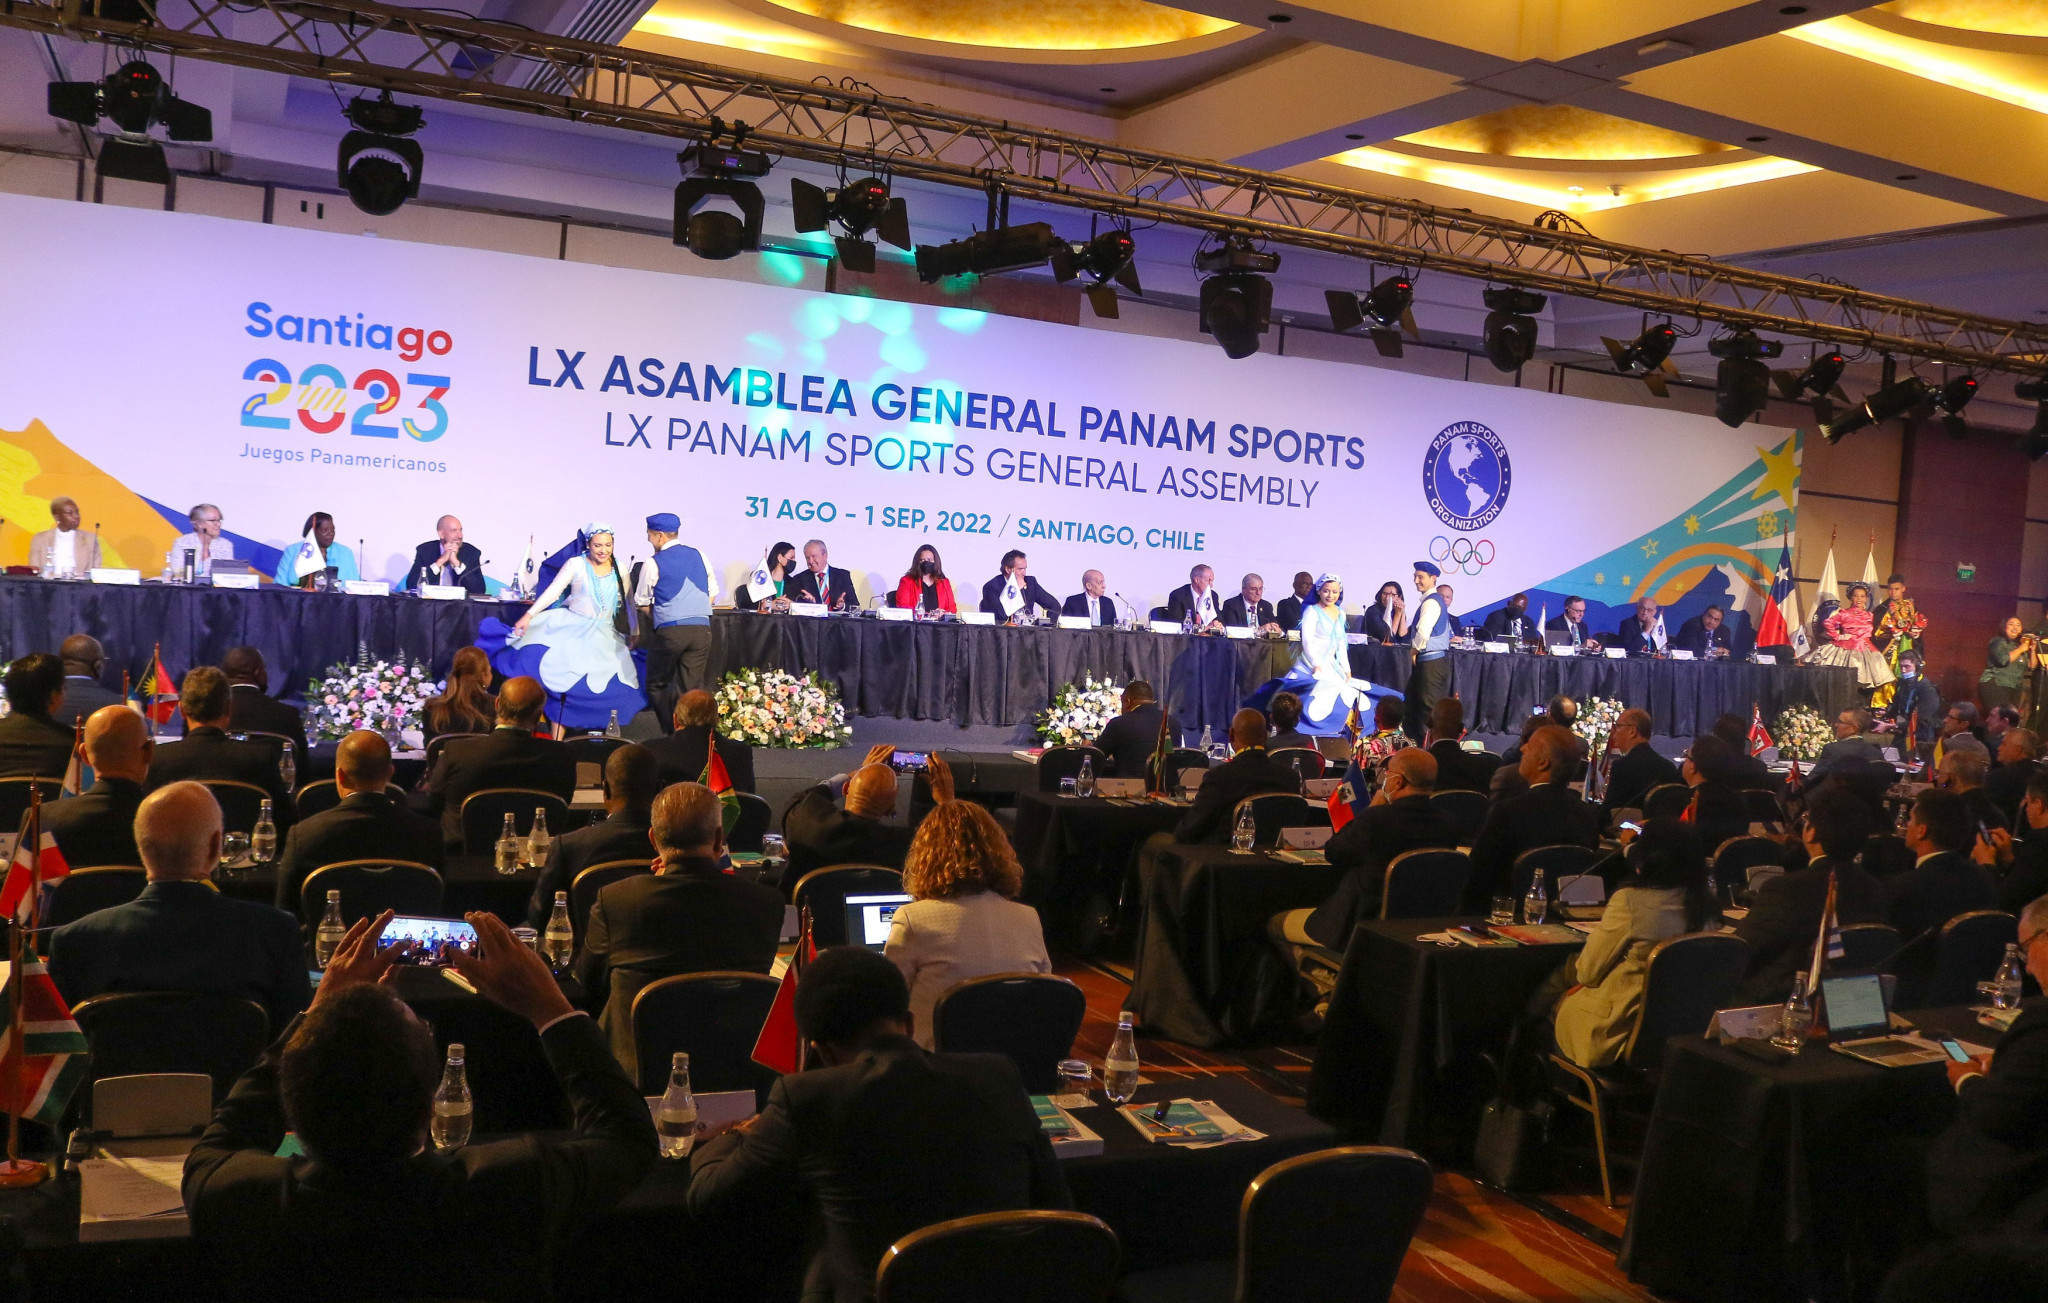 Bach urged the Panam Sports General Assembly to 